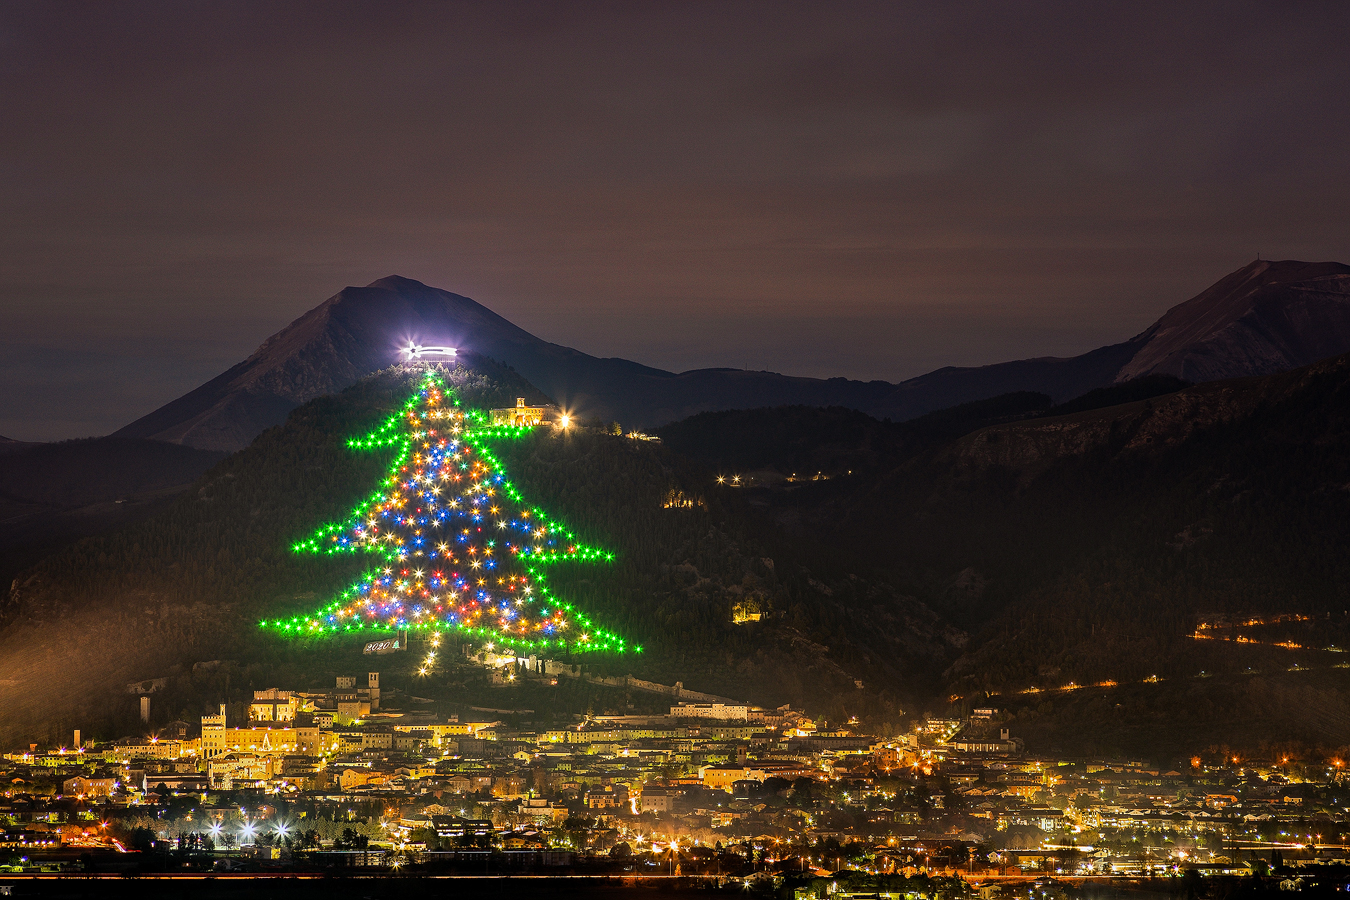 The world's largest Christmas tree...